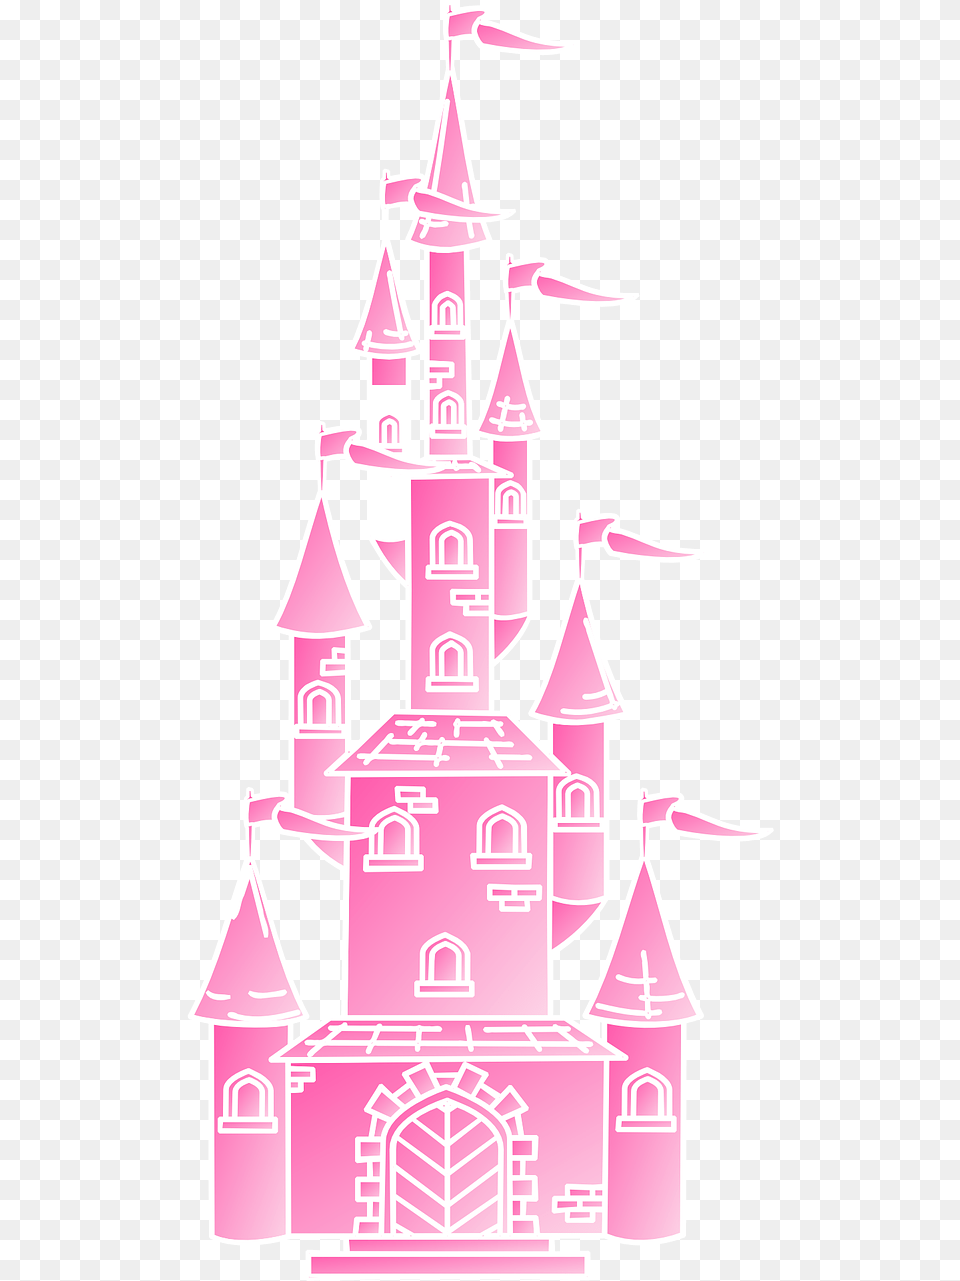 Castle Fairy Tale Turrets Photo Fairy Tale Turret, Architecture, Building, Spire, Tower Png